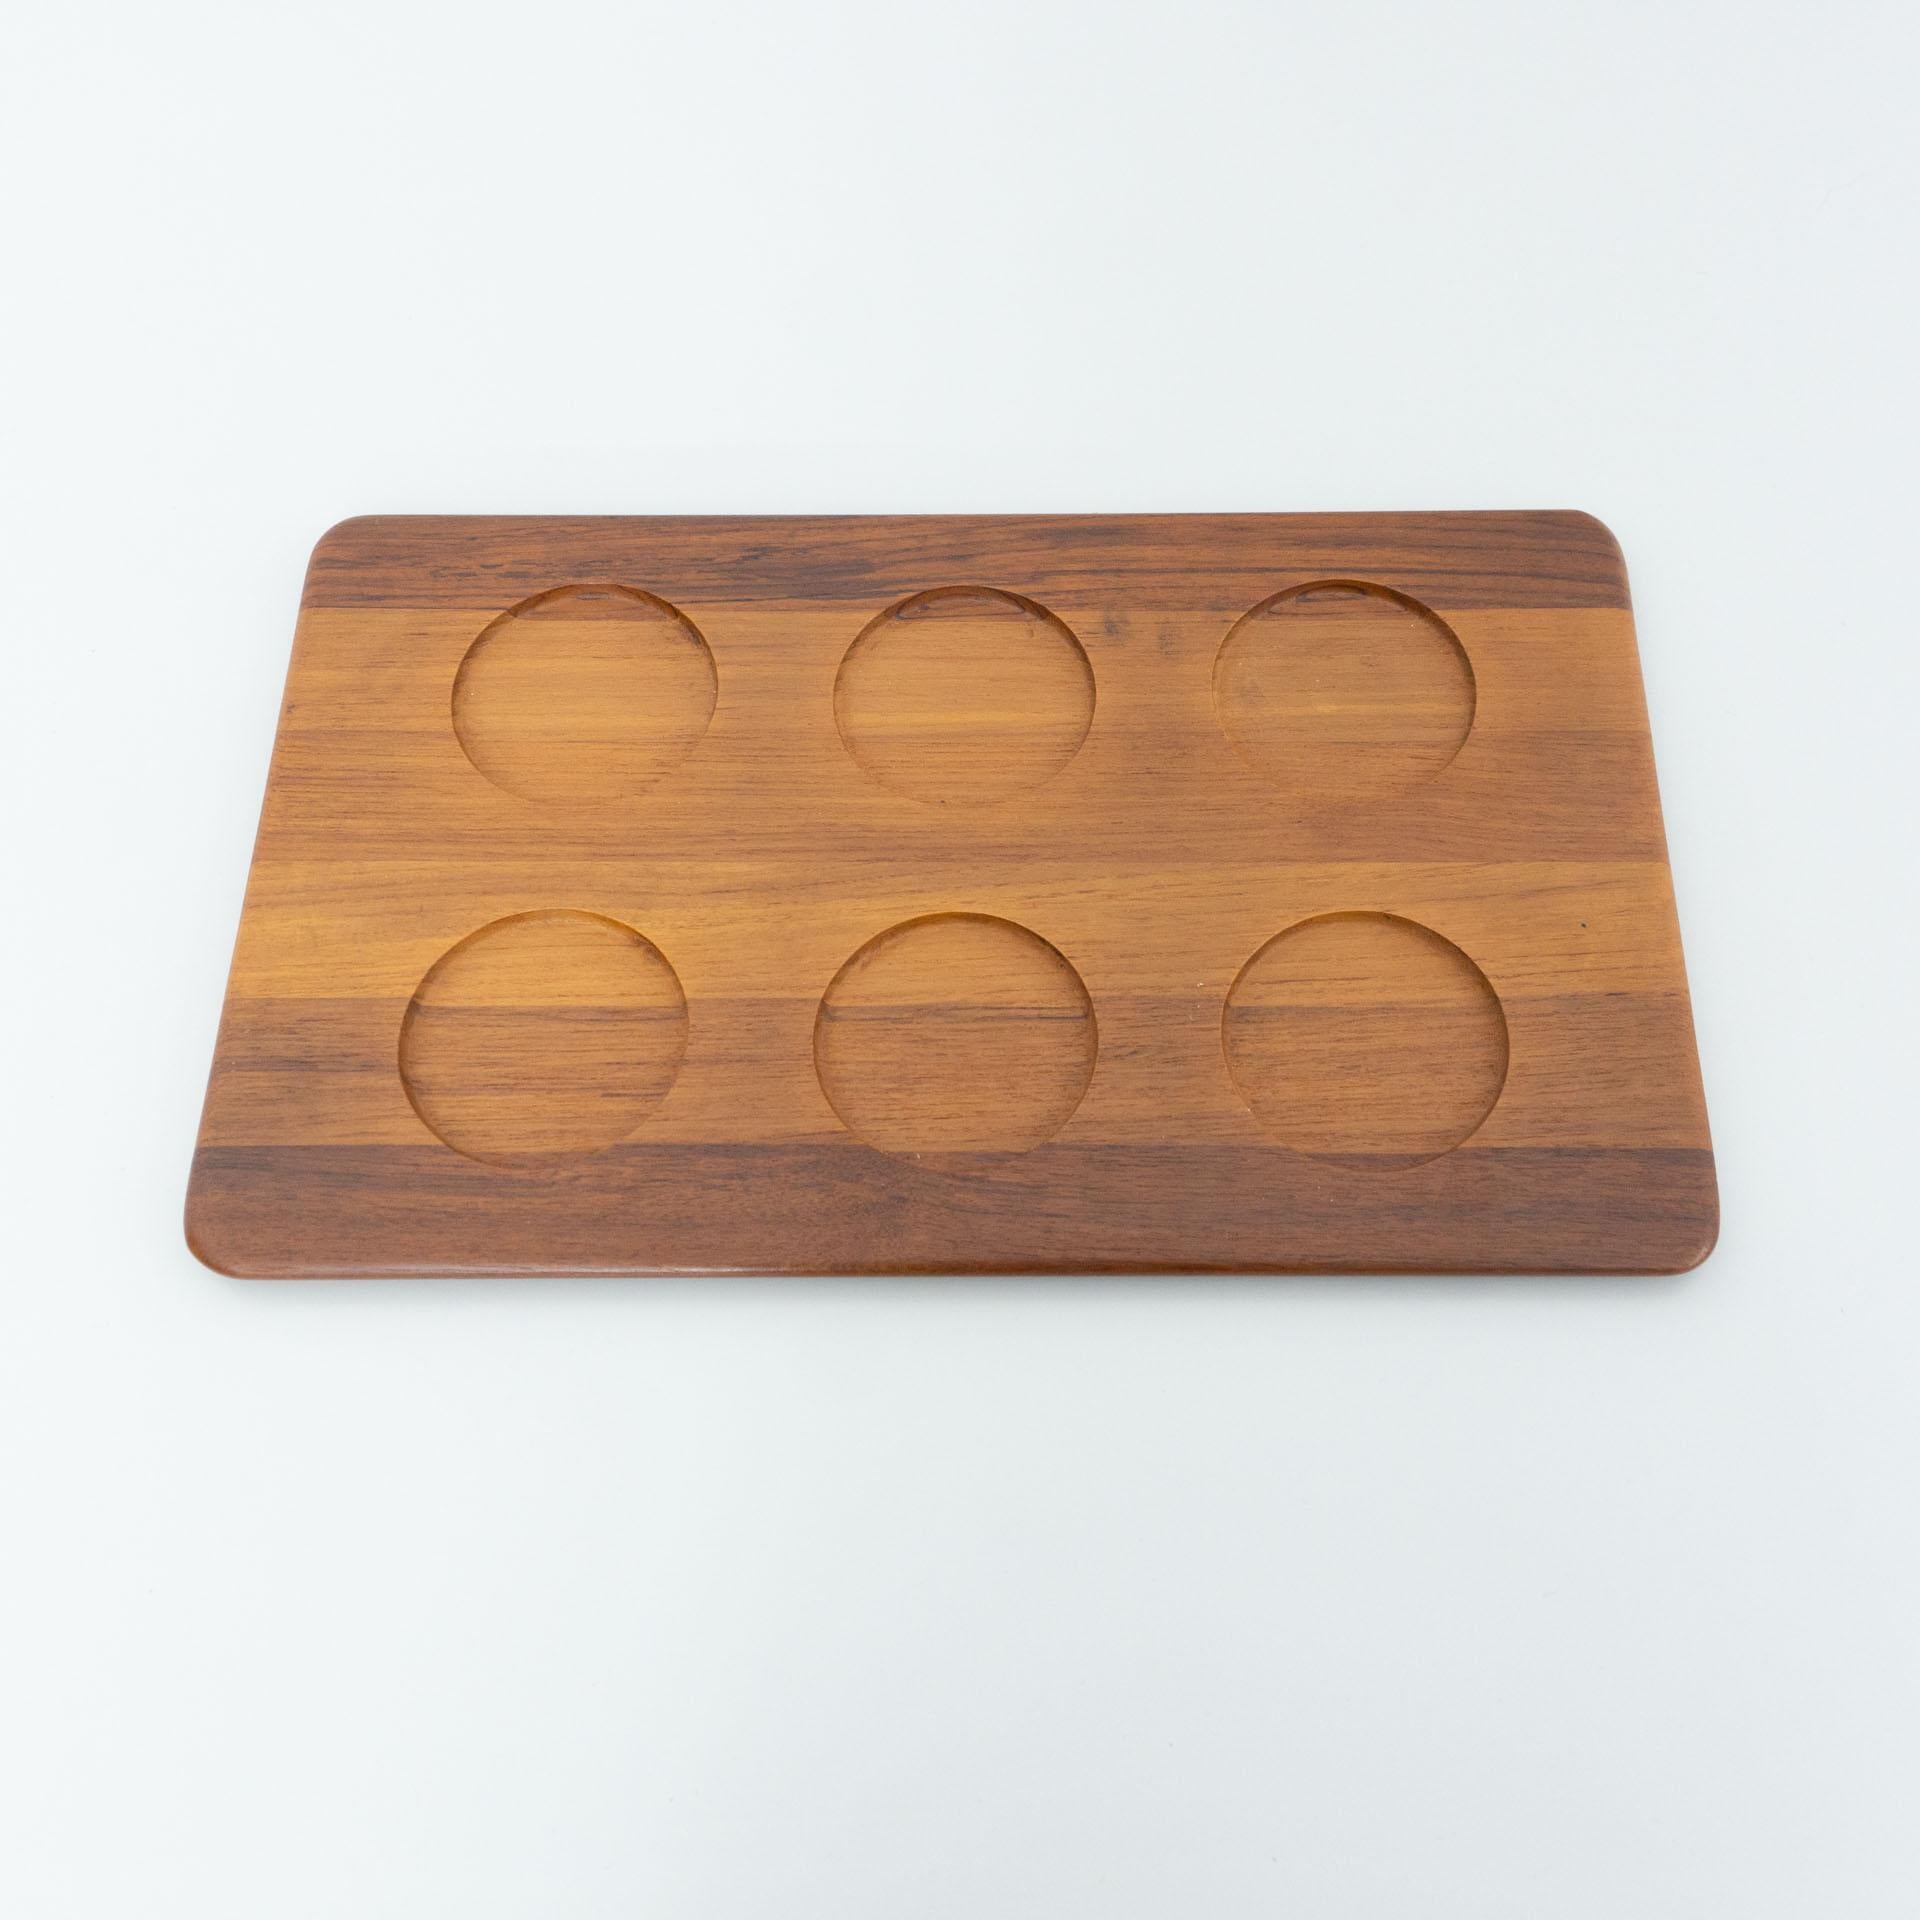 Other Wooden Tray for Glasses by Digmed from 1964